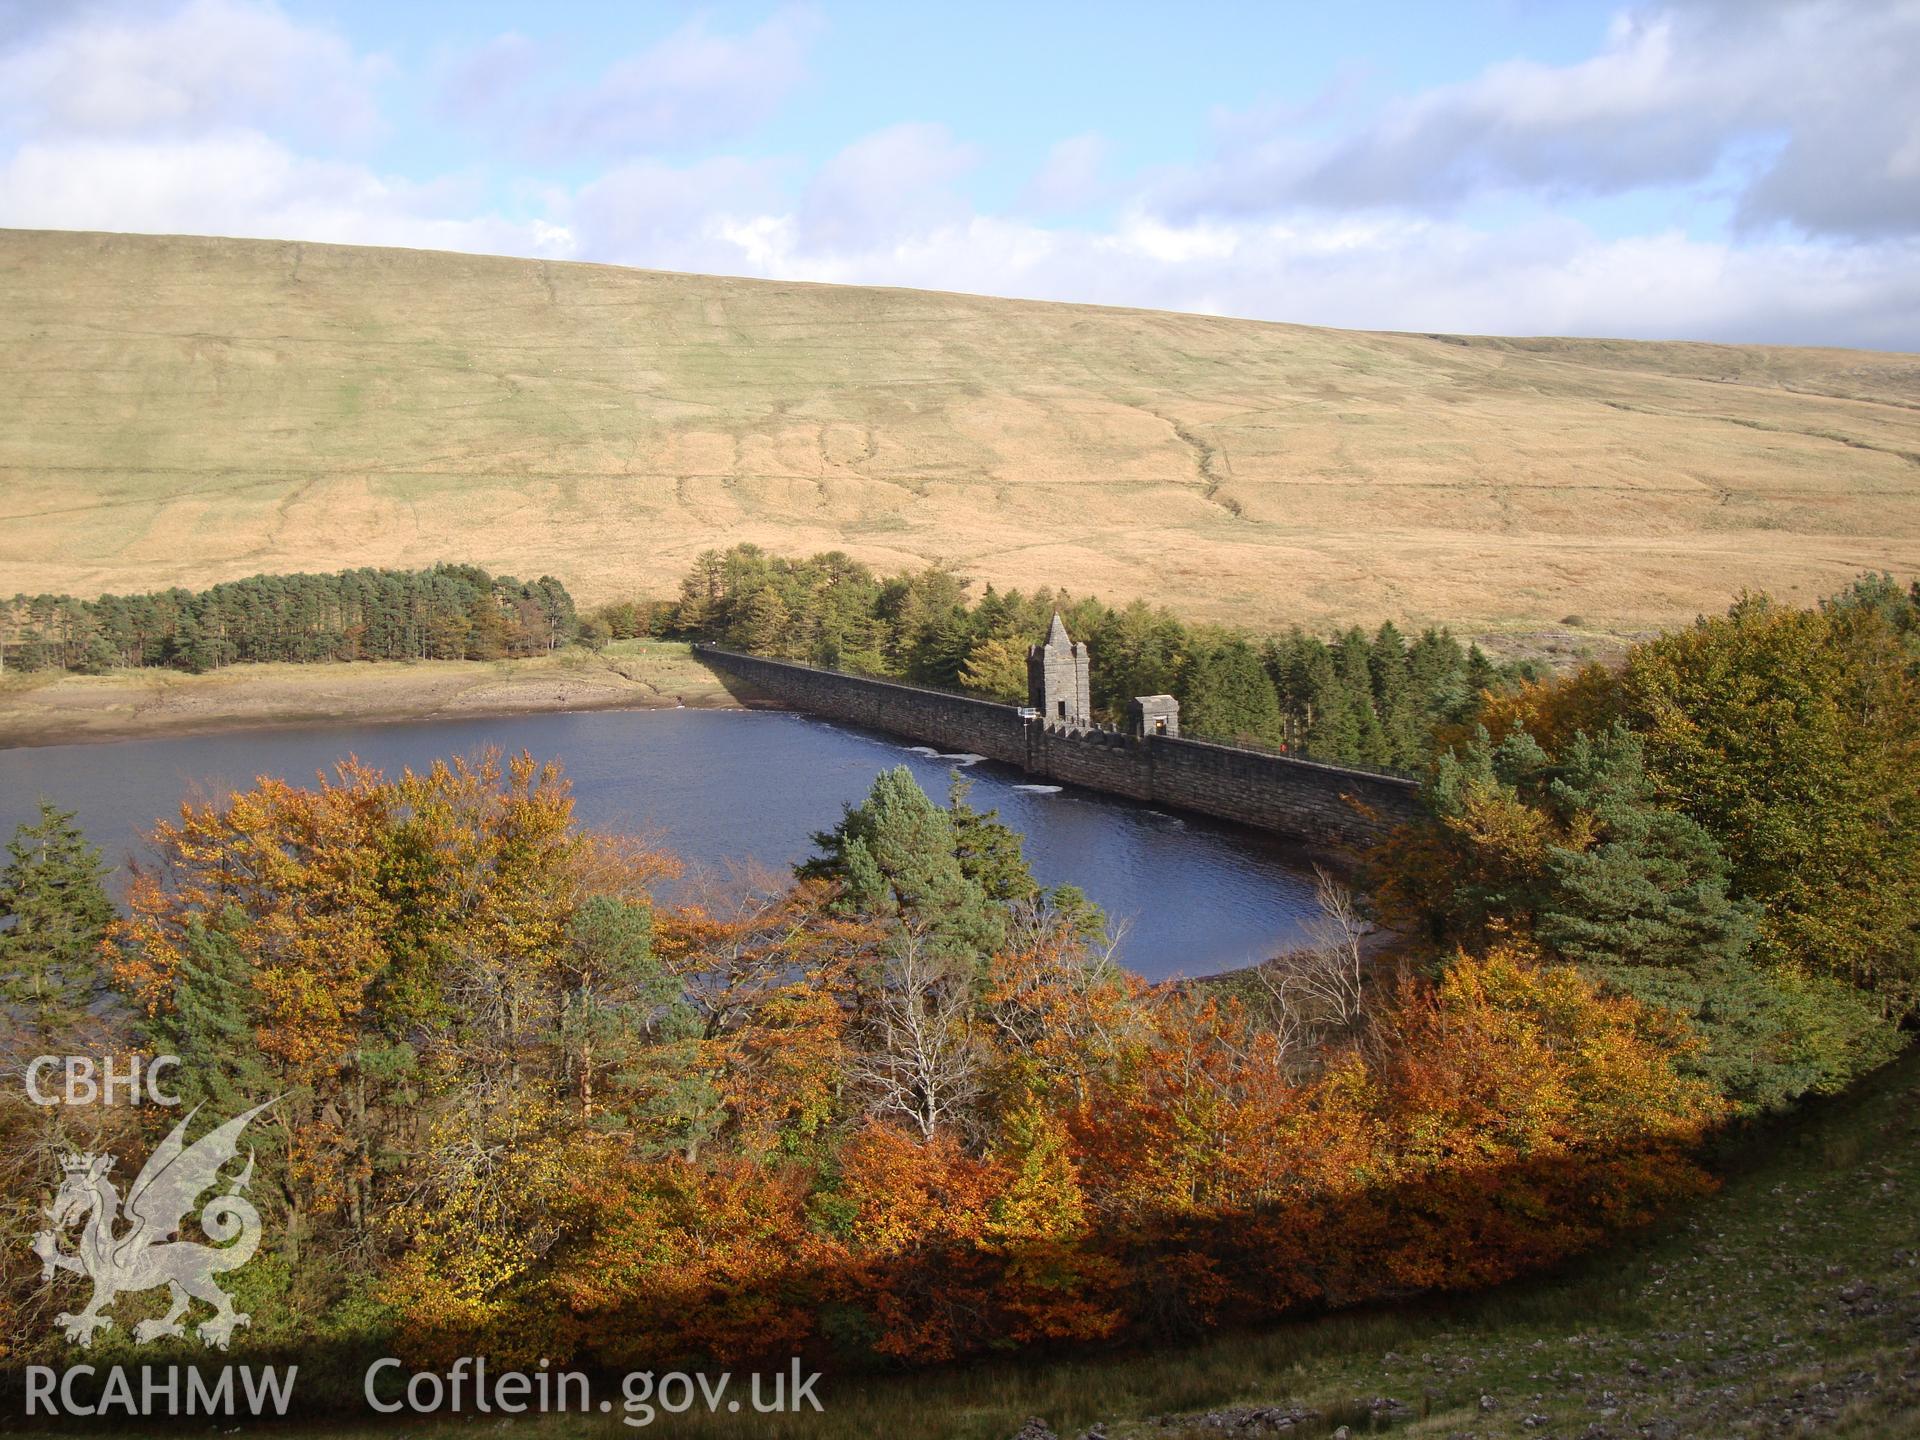 Digital colour photograph of Upper Neuadd dam taken on 16/10/2008 by R.P.Sambrook during the Brecon Beacons (east) Uplands Survey undertaken by Trysor.